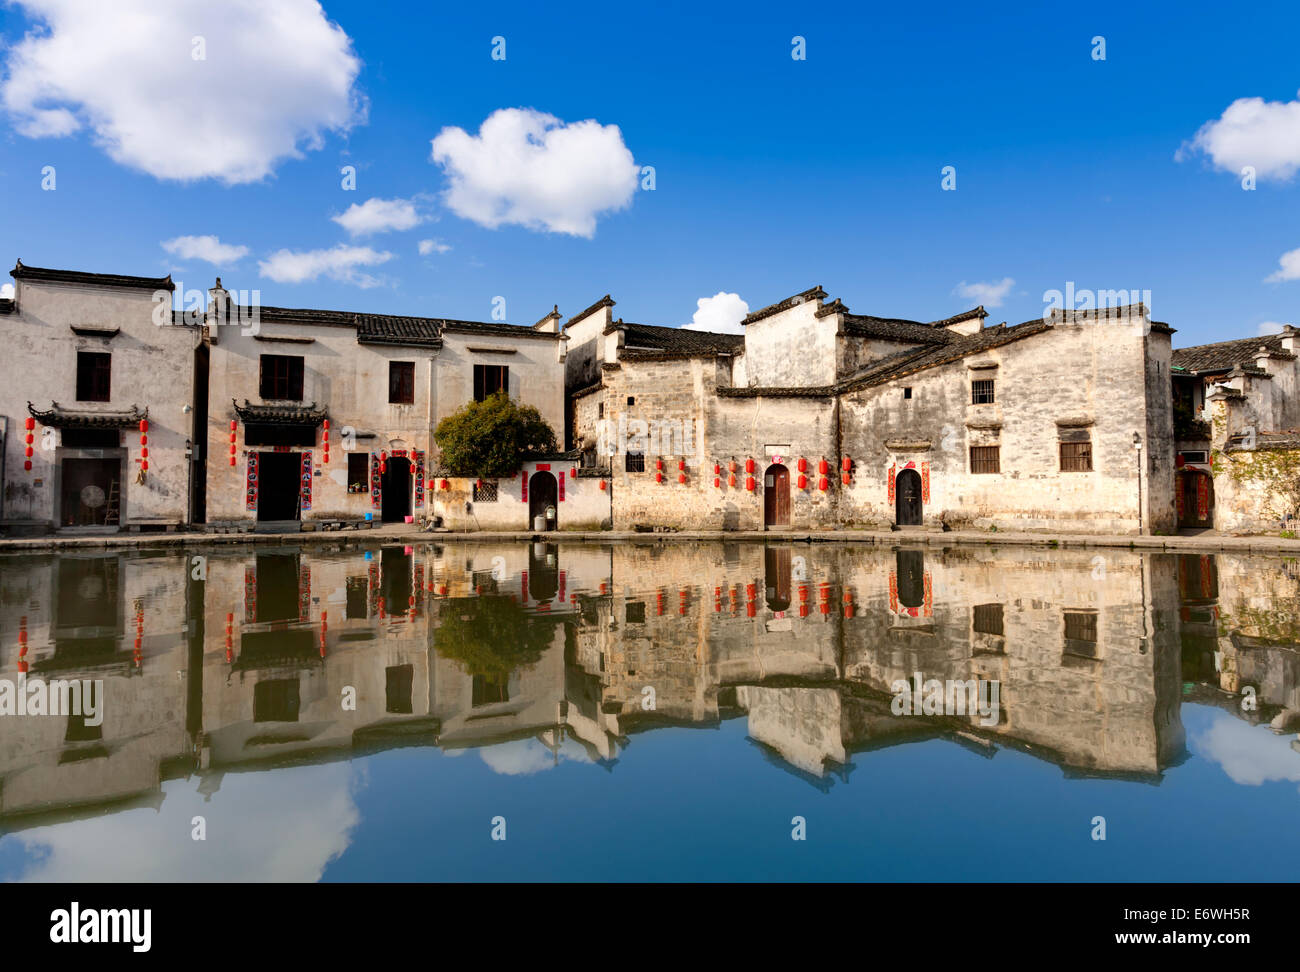 Hongcun is an ancient village located in Anhui province, China. The village became a UNESCO World Heritage Site. Stock Photo